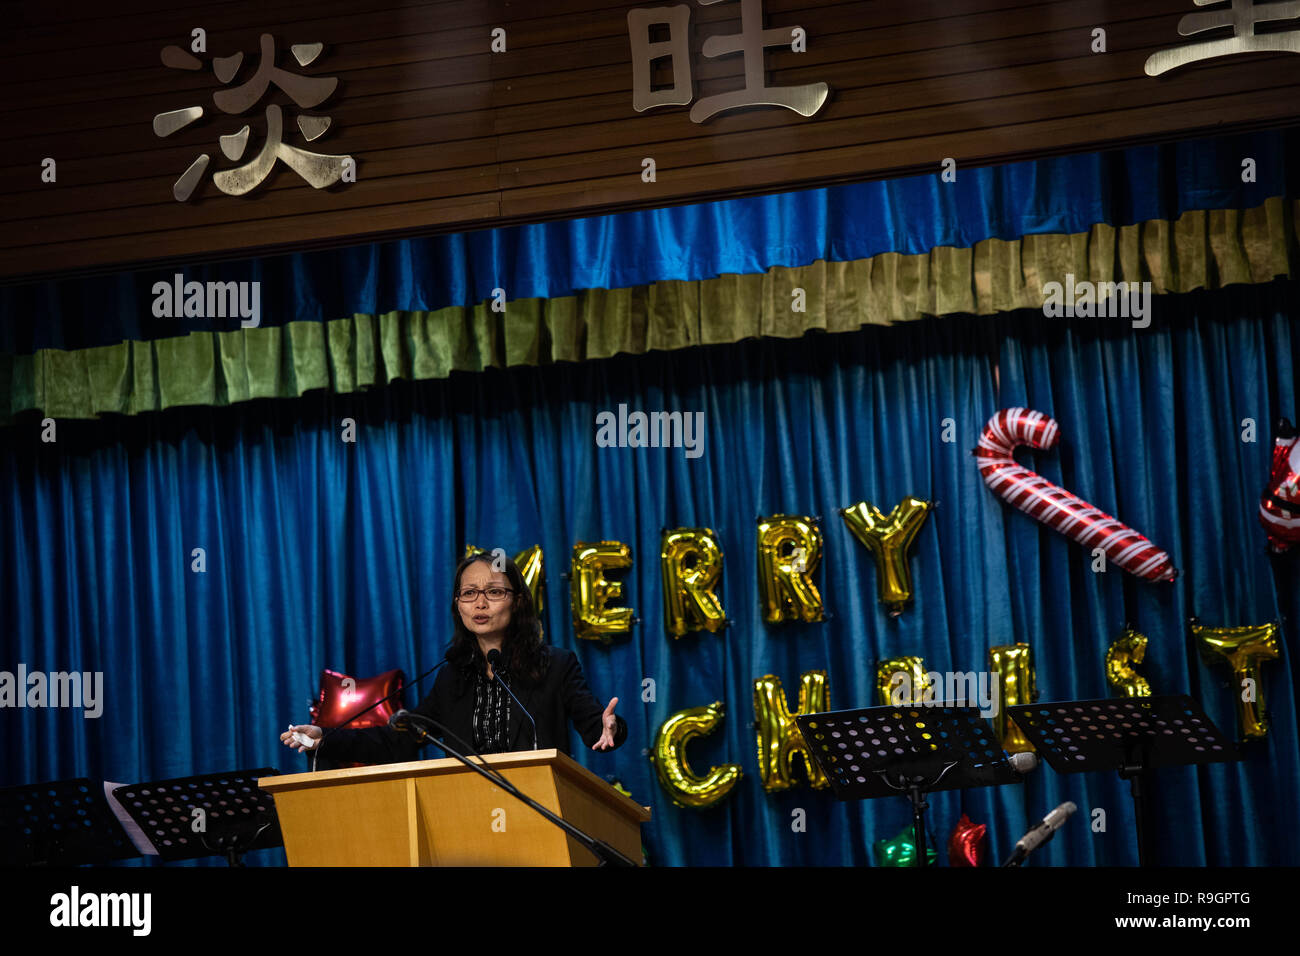 Hong Kong. 23rd Dec, 2018. Priest Ng See Wai seen addressing church goers during a service.Attendees and members of the congregation wear black during a church service ahead of Christmas, in solidarity with underground churches in China, especially larger establishments such as the Early Rain Covenant which has at least 500 members that are facing persecution. Credit: Stanley Leung/SOPA Images/ZUMA Wire/Alamy Live News Stock Photo